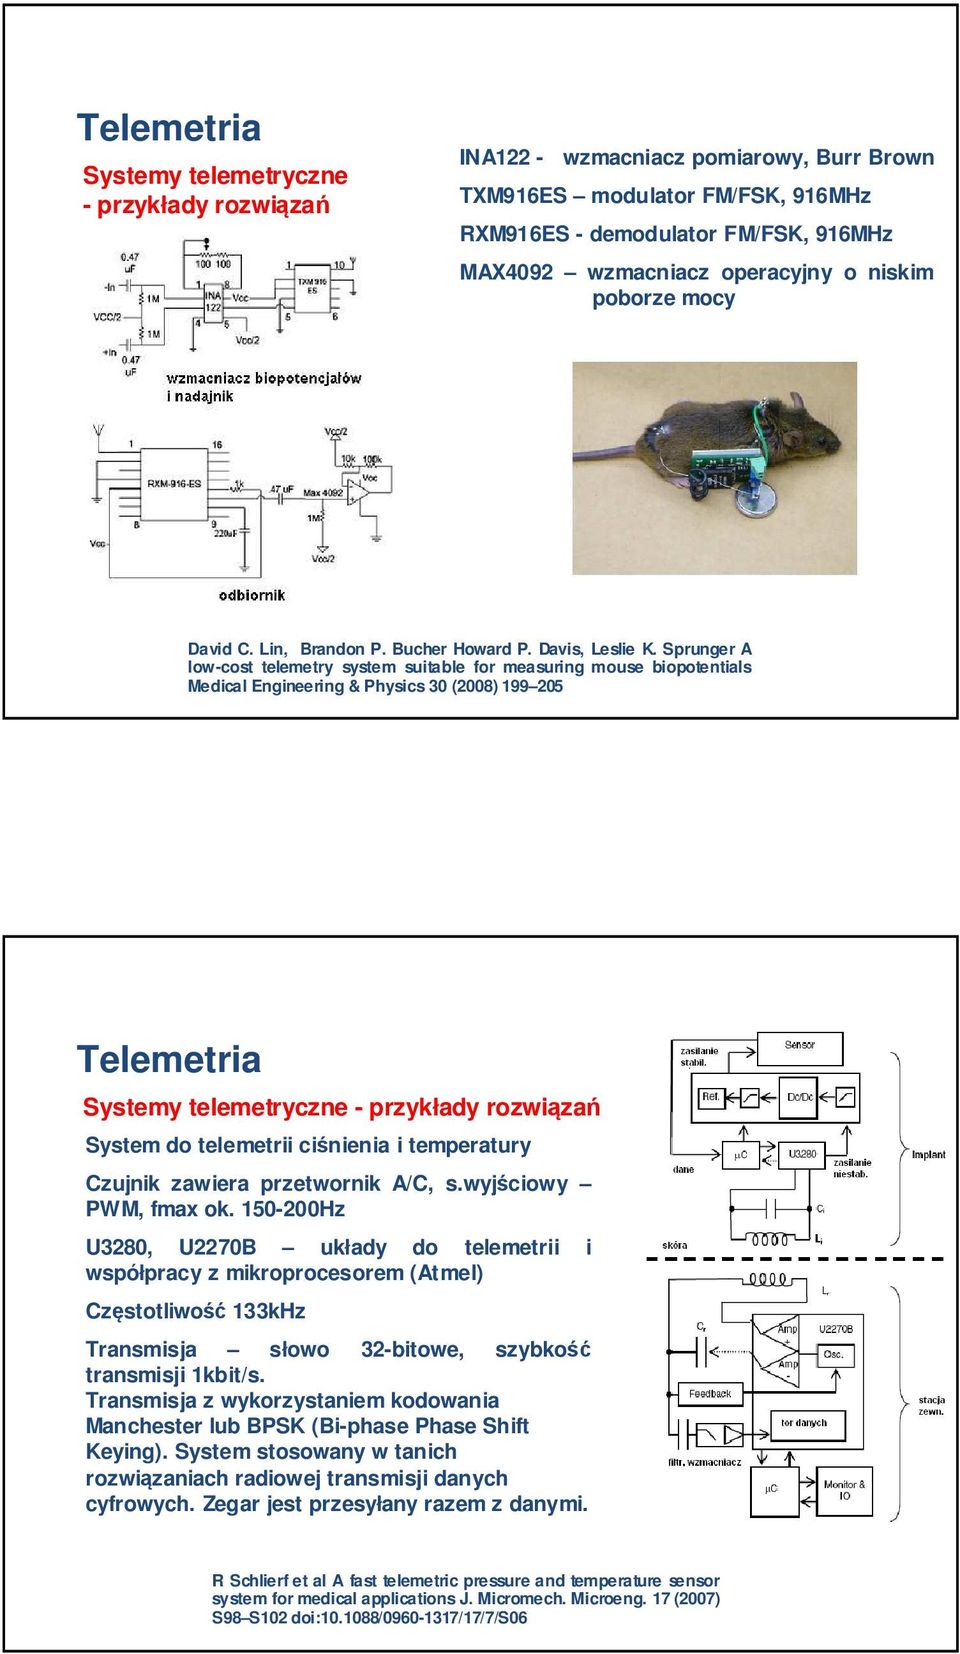 Sprunger A low-cost telemetry system suitable for measuring mouse biopotentials Medical Engineering & Physics 30 (2008) 199 205 Telemetria Systemy telemetryczne - przykłady rozwiązań System do